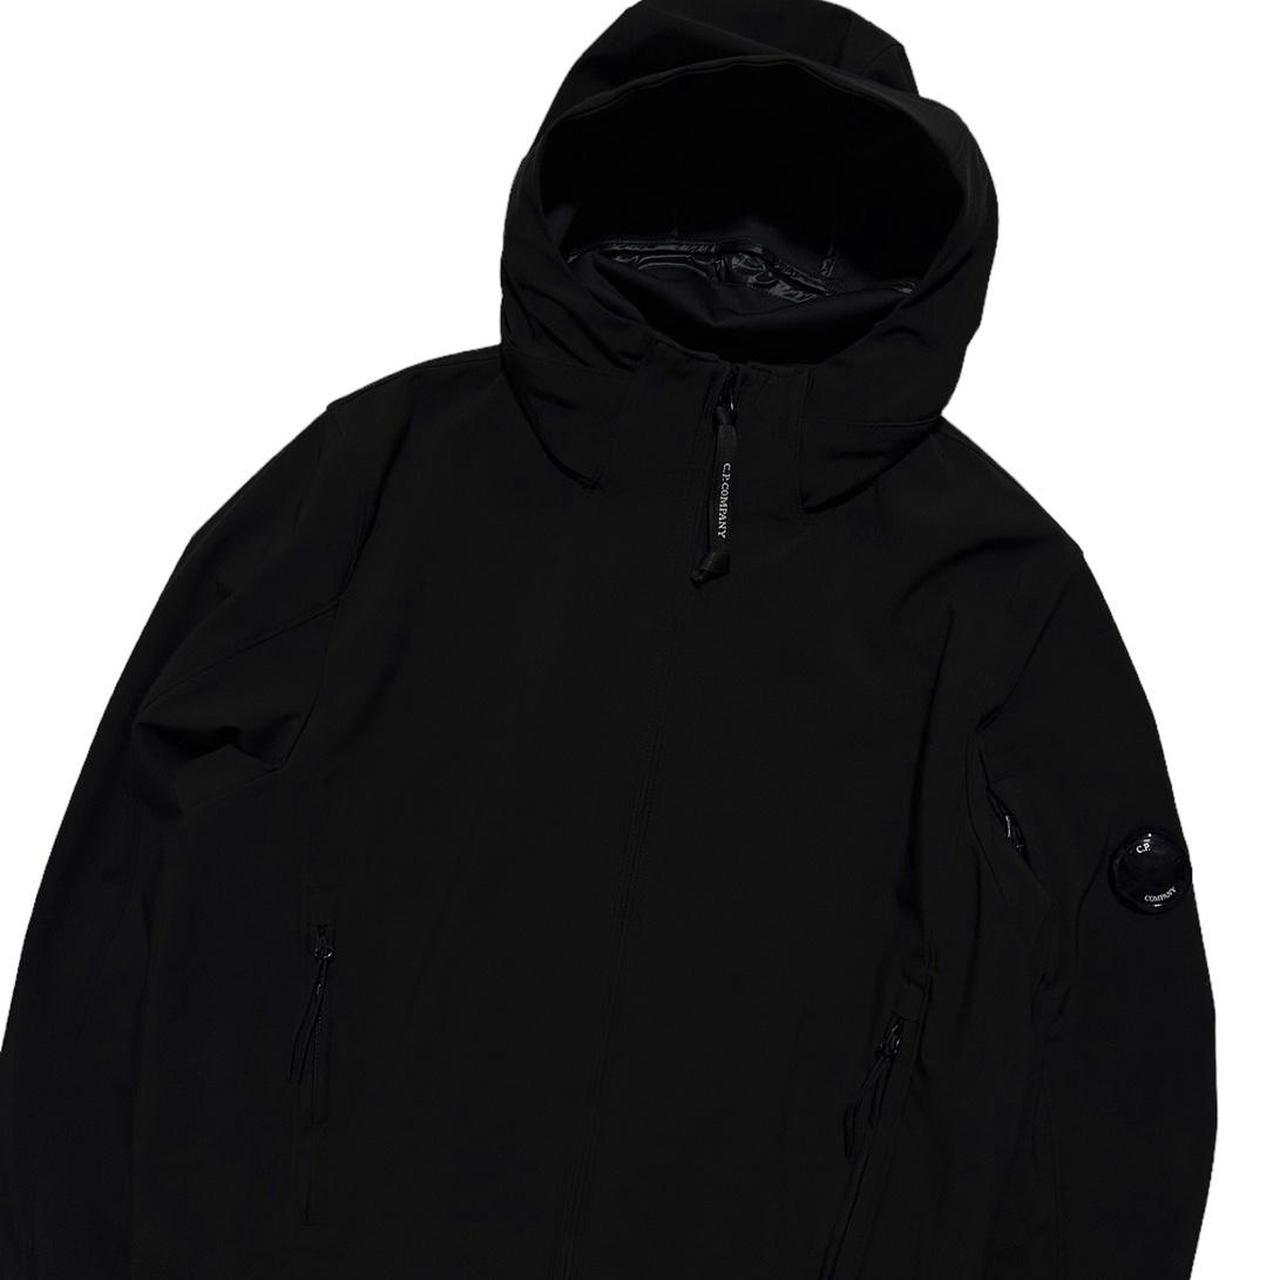 CP Company Black Soft Shell Jacket - Known Source